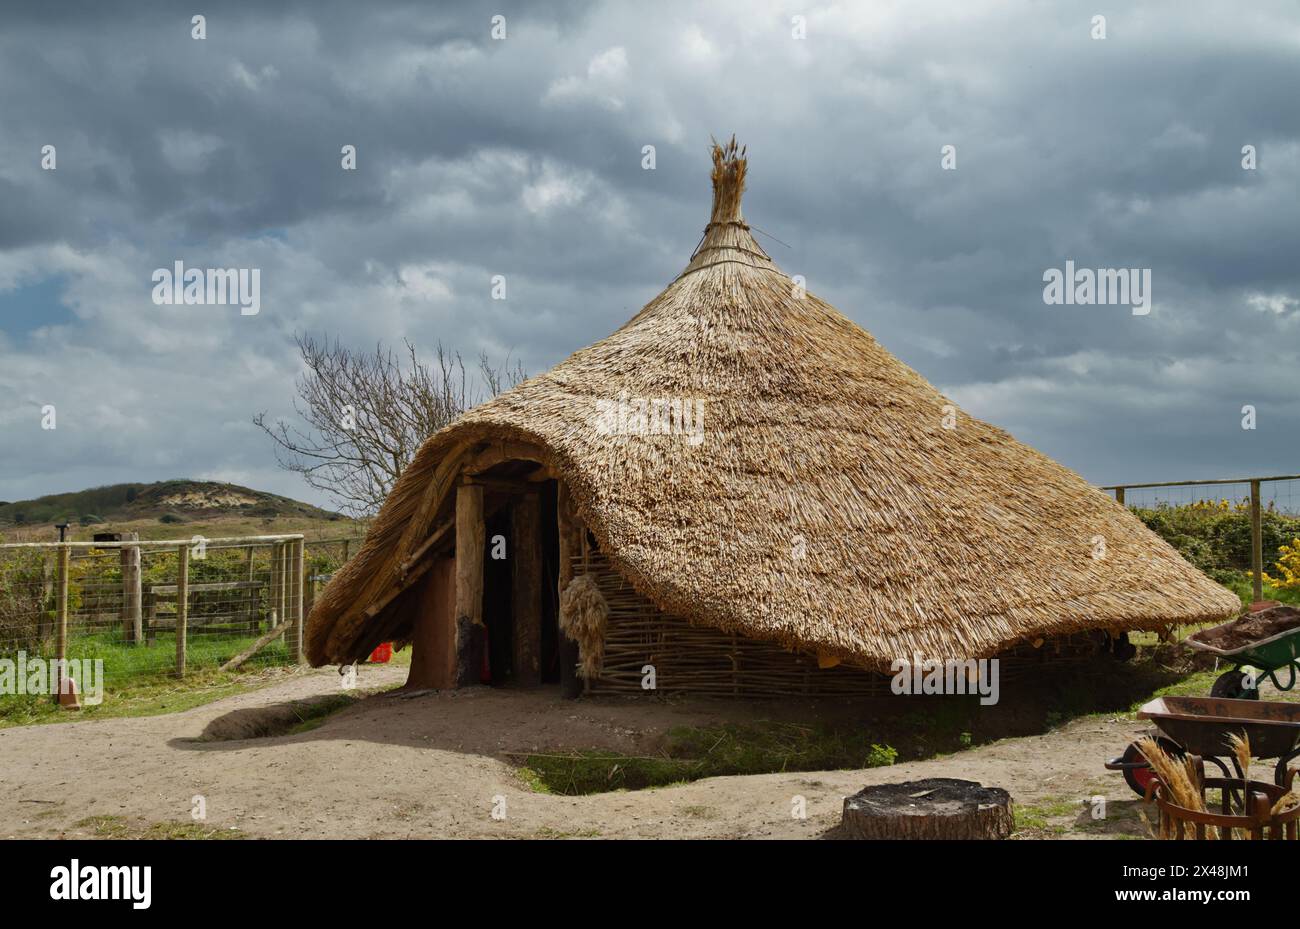 Exterior Of An Iron Age Roundhouse With Conical Thatched Roof Under Construction, Hengistbury Head, UK Stock Photo